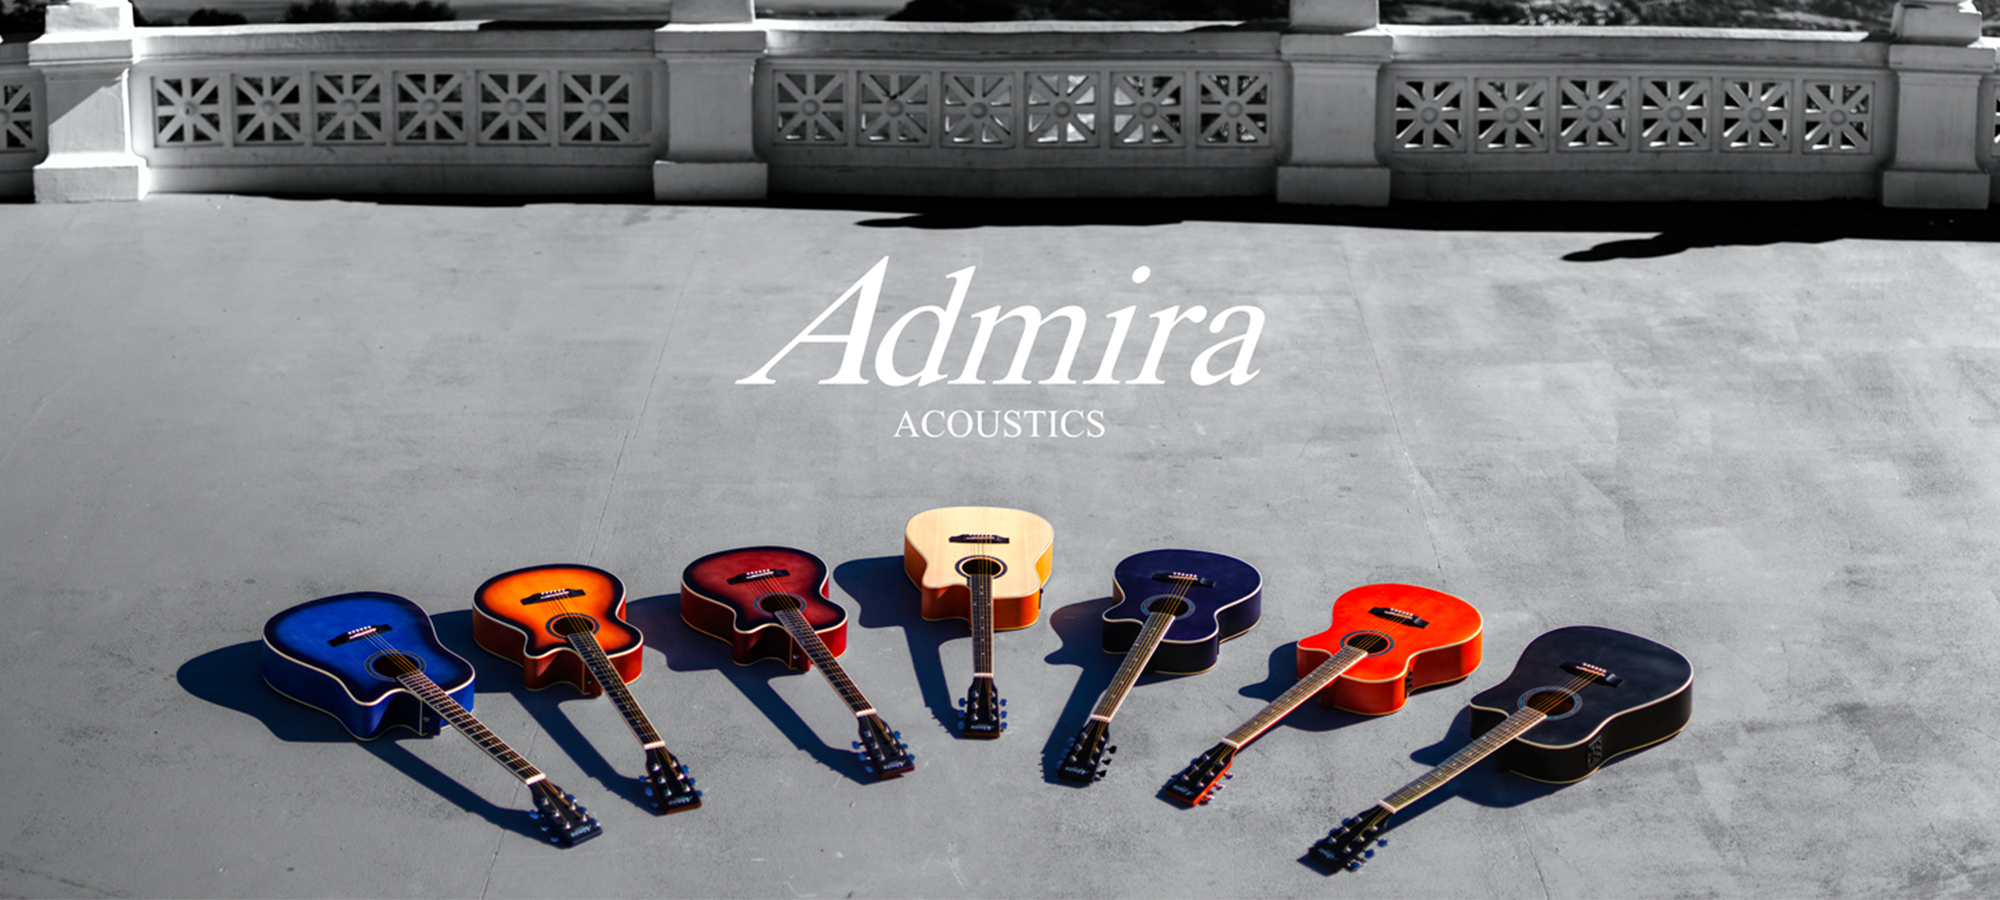 We resume production of the acoustic guitar line